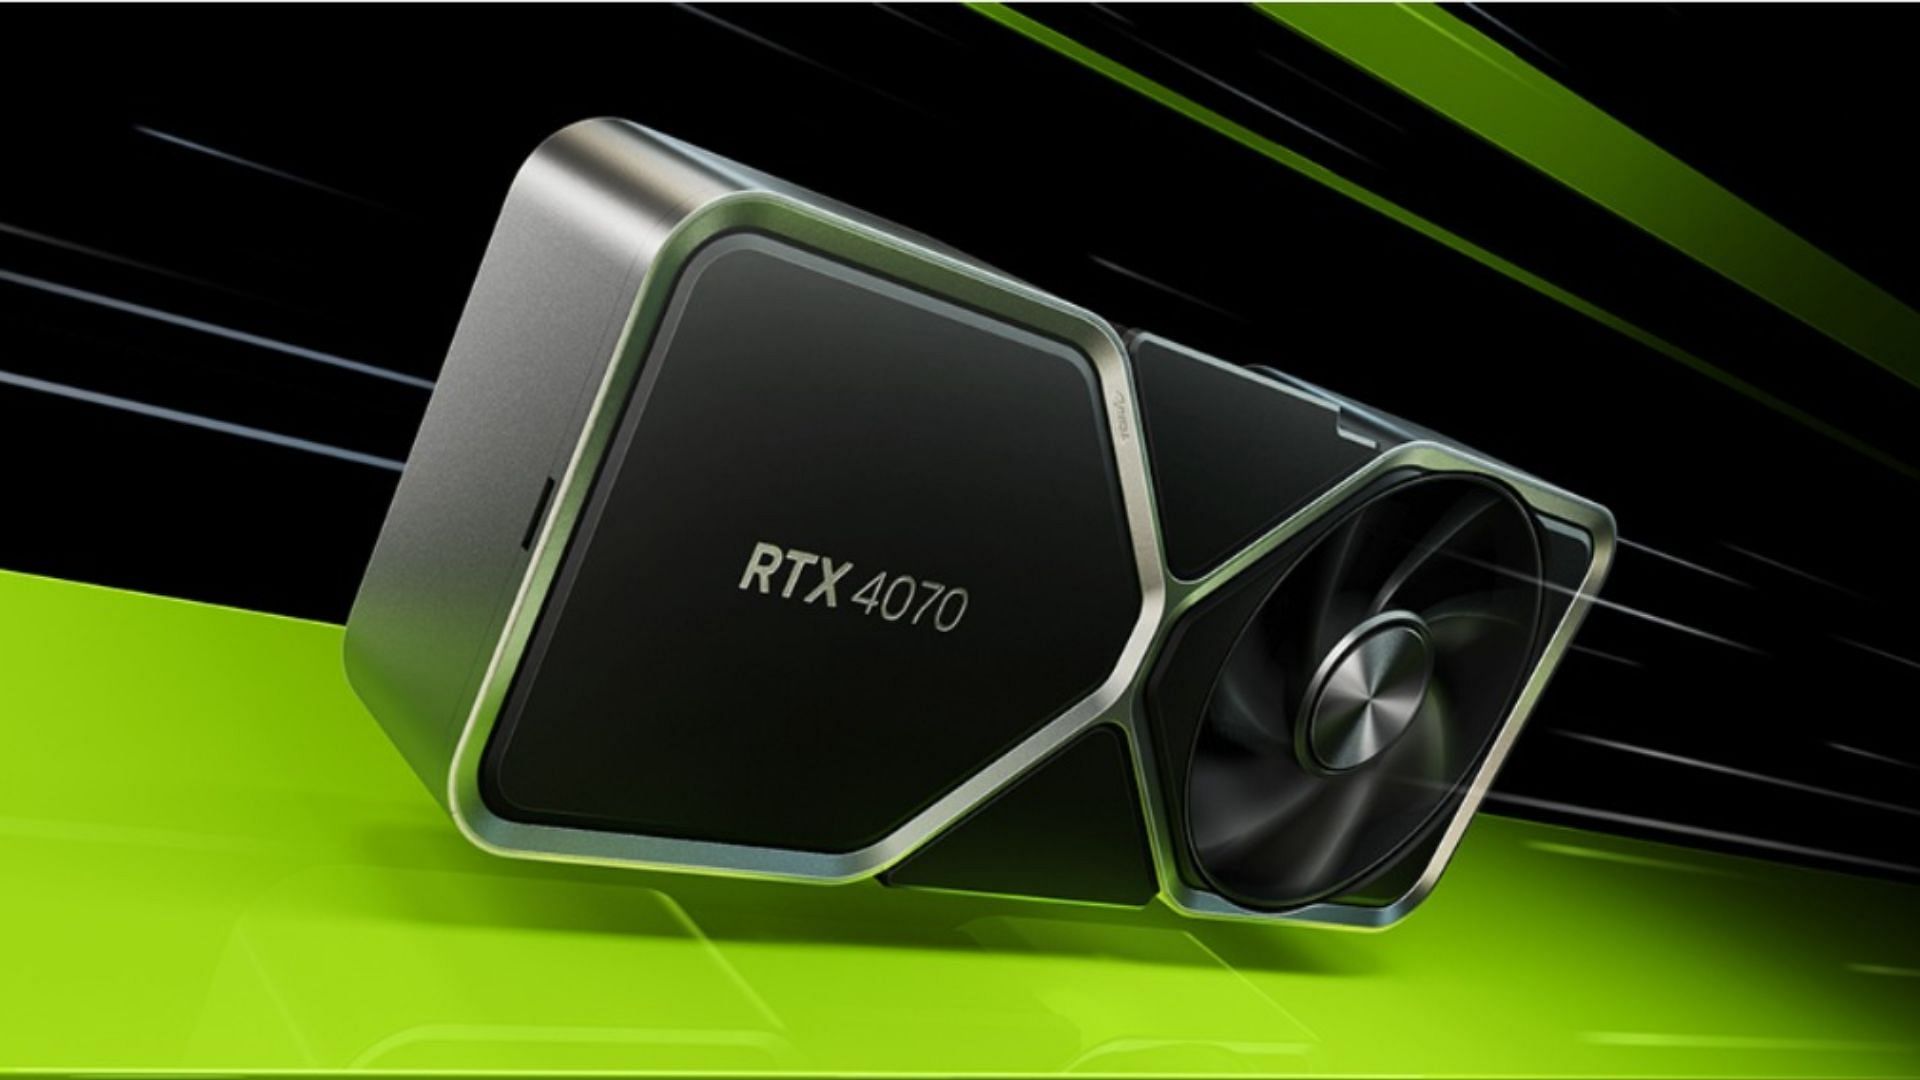 The Nvidia RTX 4070 is a great mid-range card for gaming (Image via Nvidia)